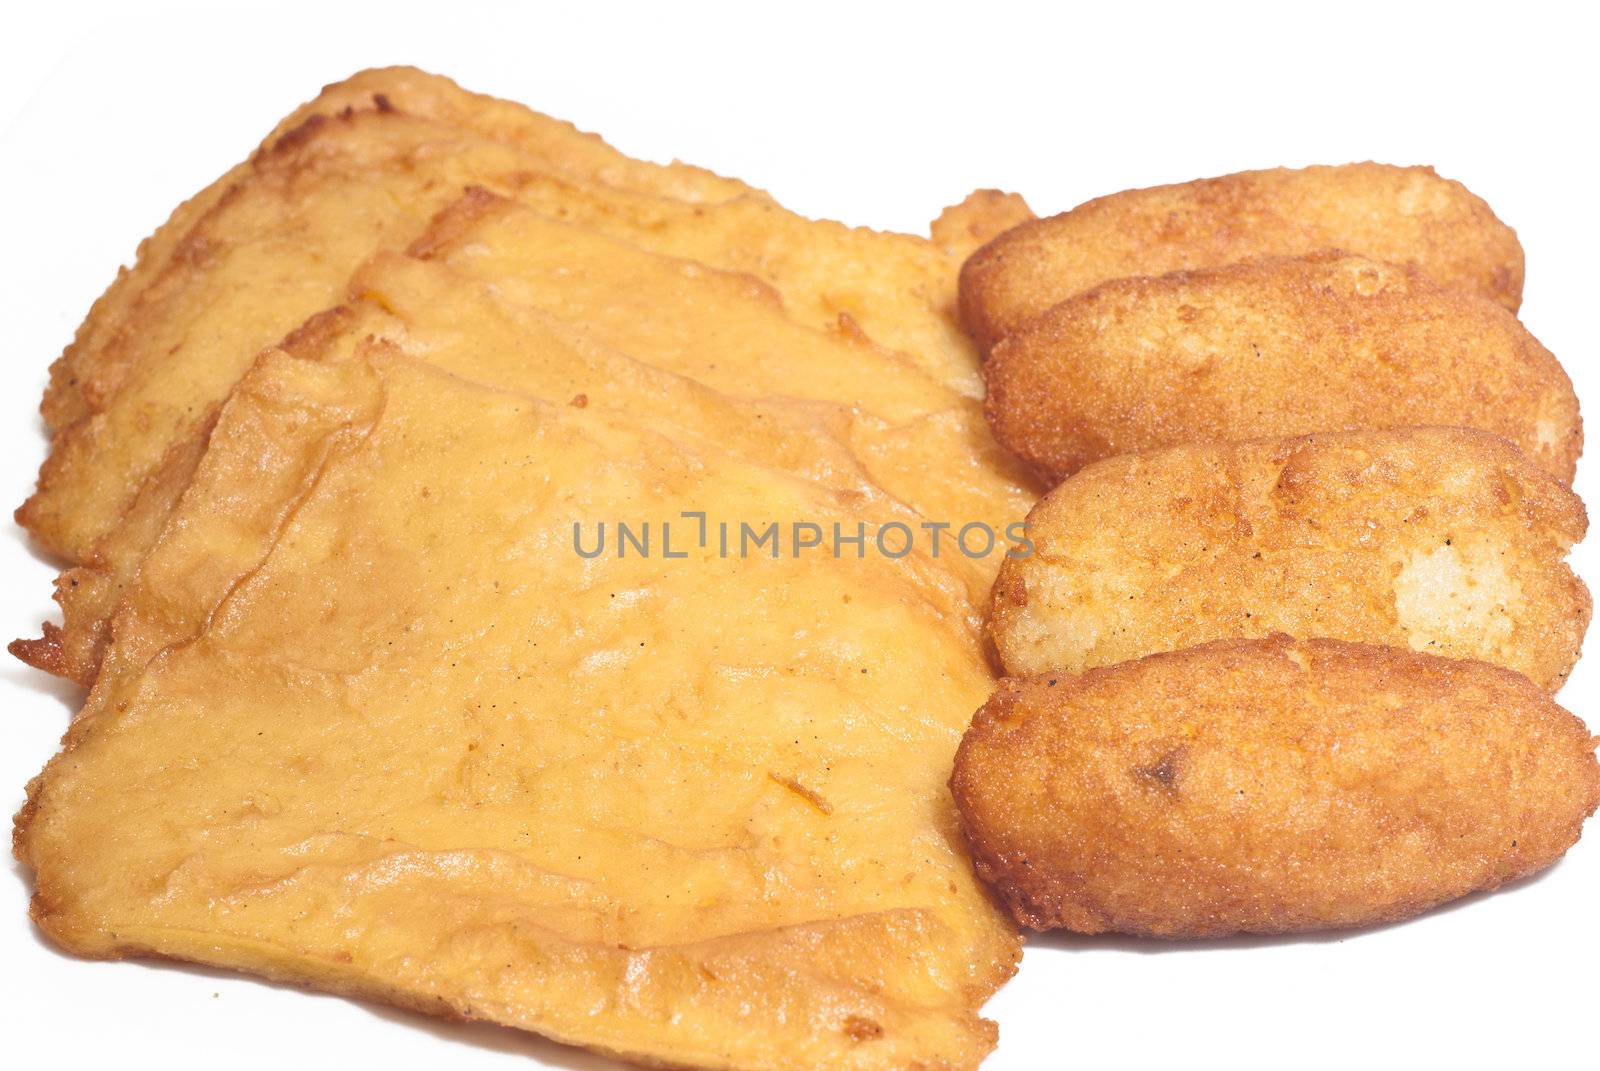 Sandwich with panelle and crocchette on white background. typical Sicilian food